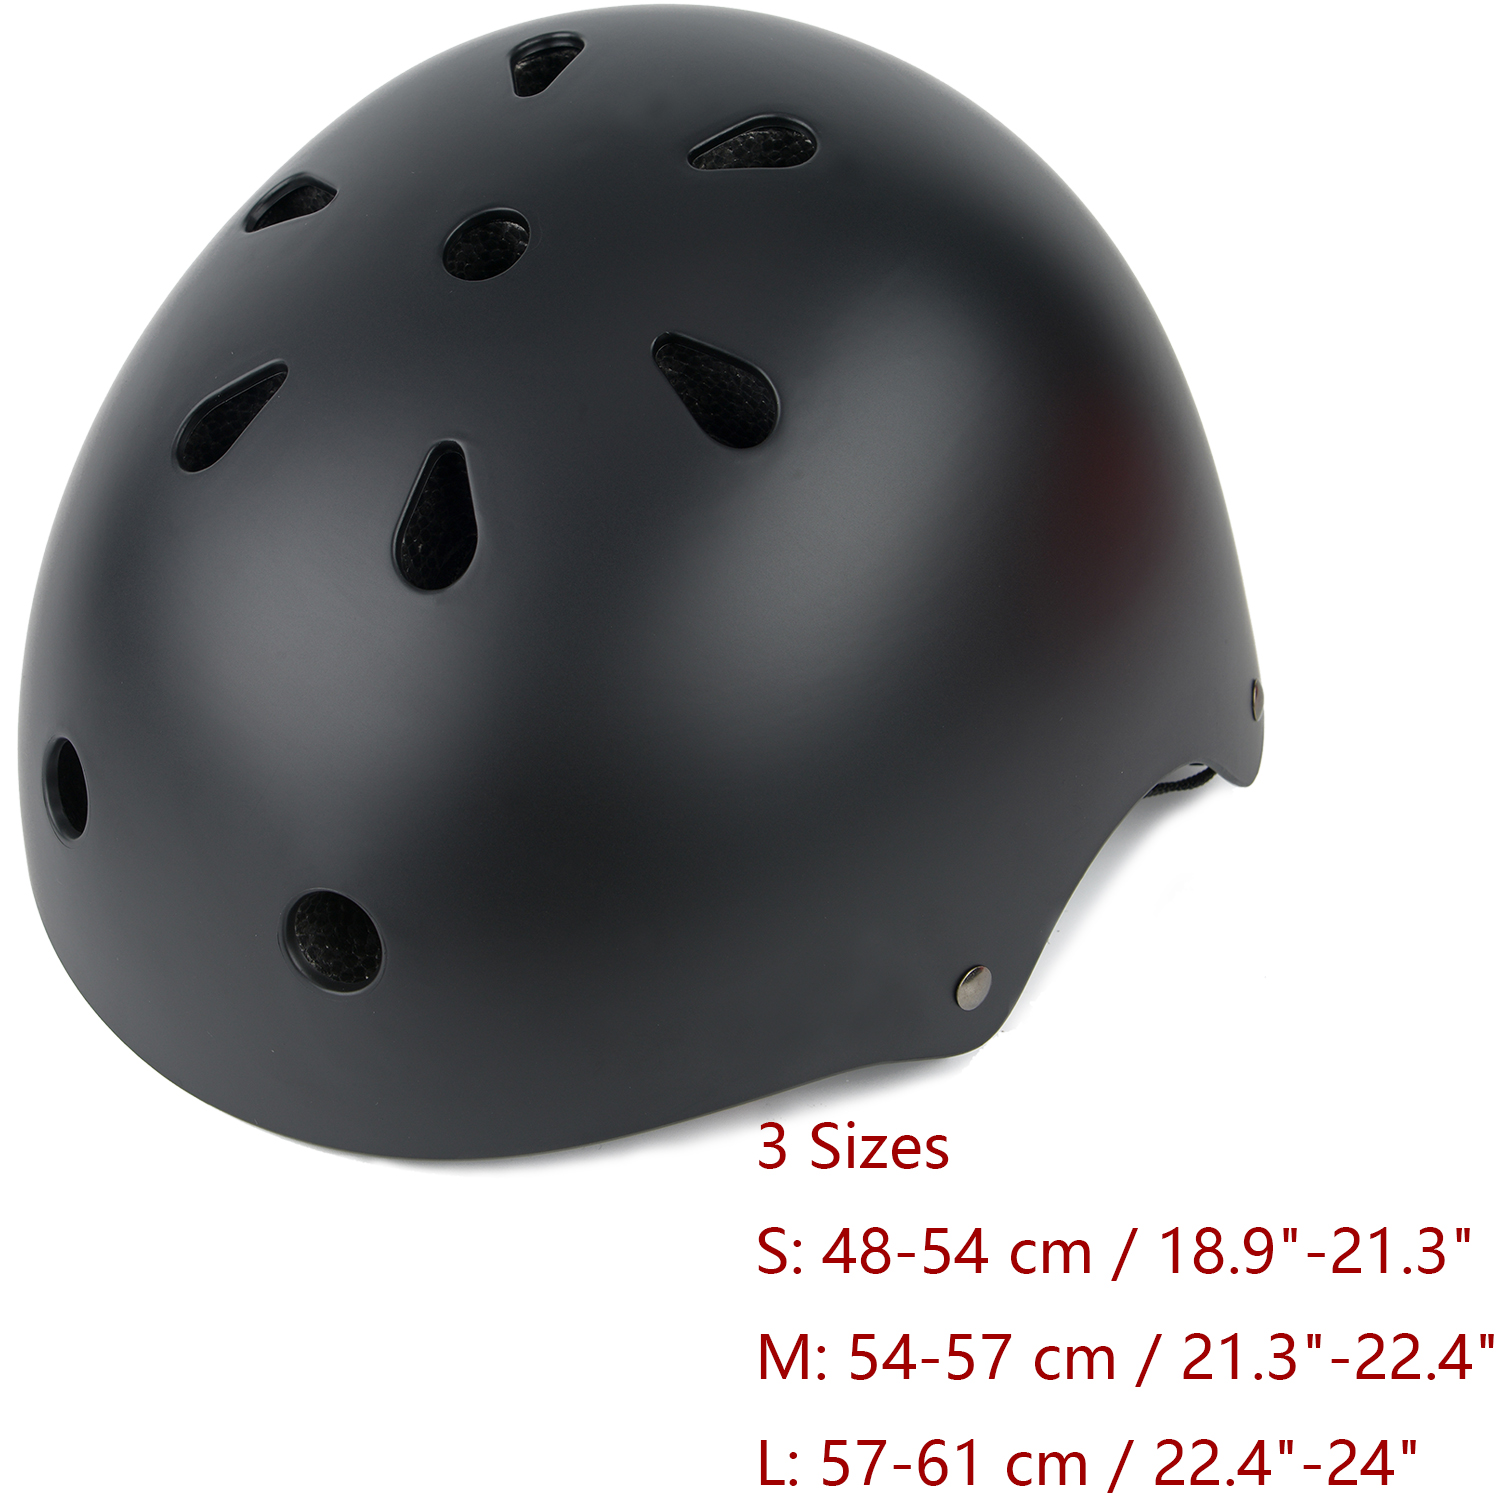 Adjustable from Toddler to Youth with 3 Sizes Safety Toddler Helmet Anti-Shock for Multi-Sport Kids Bike Helmet Cycling Skate Scooter Skateboard 